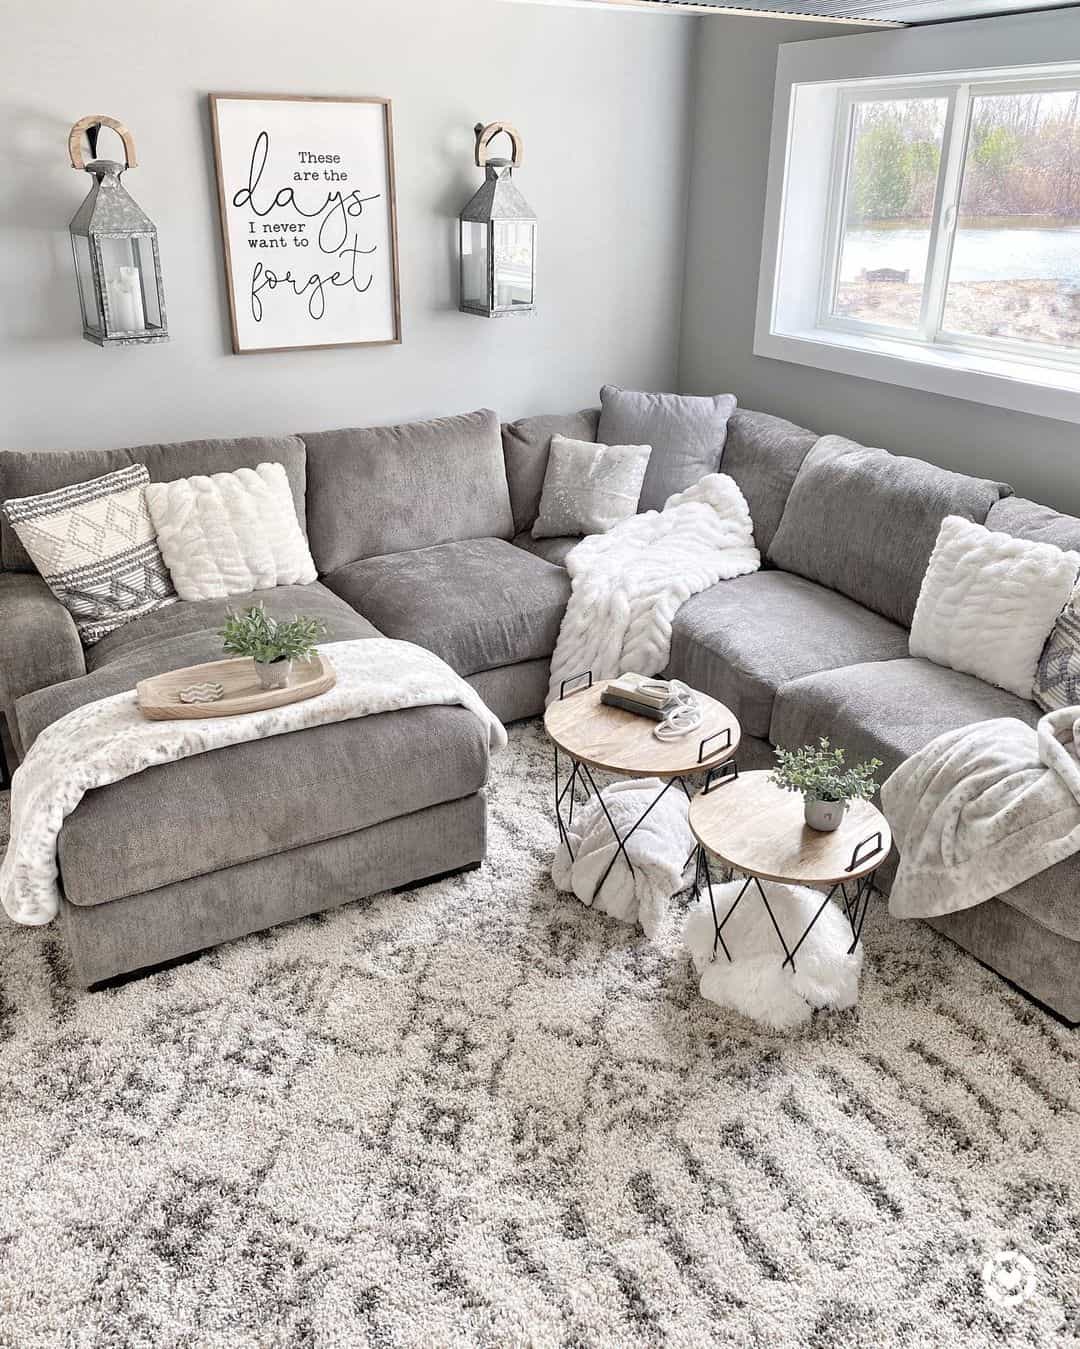 600 Couch & Rug ideas